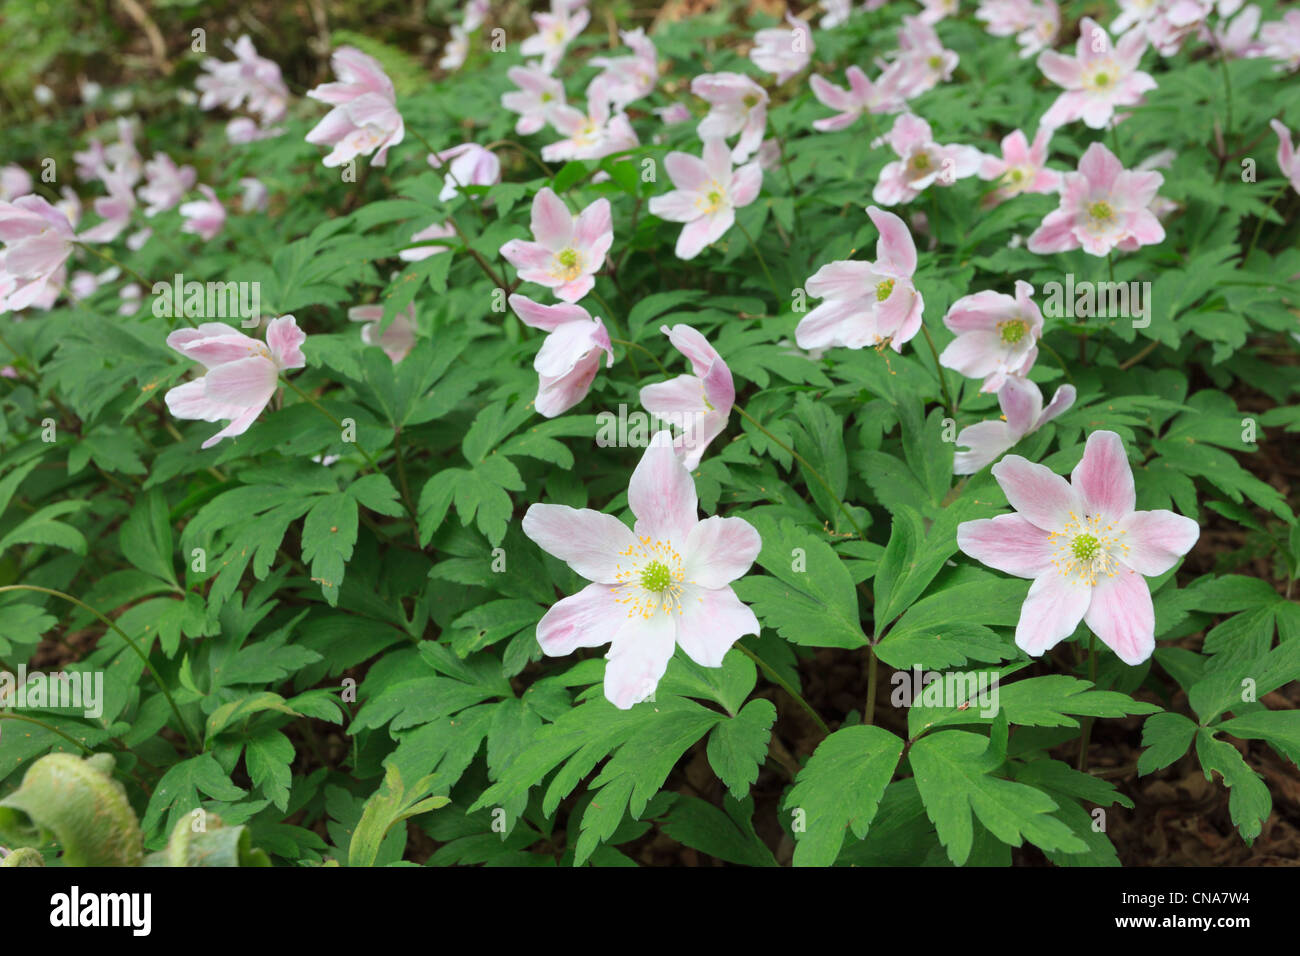 Close-up of Wood Anemones Anemone nemorosa native wildflowers with pink flowers flowering in spring or early summer. Wales UK Britain Stock Photo